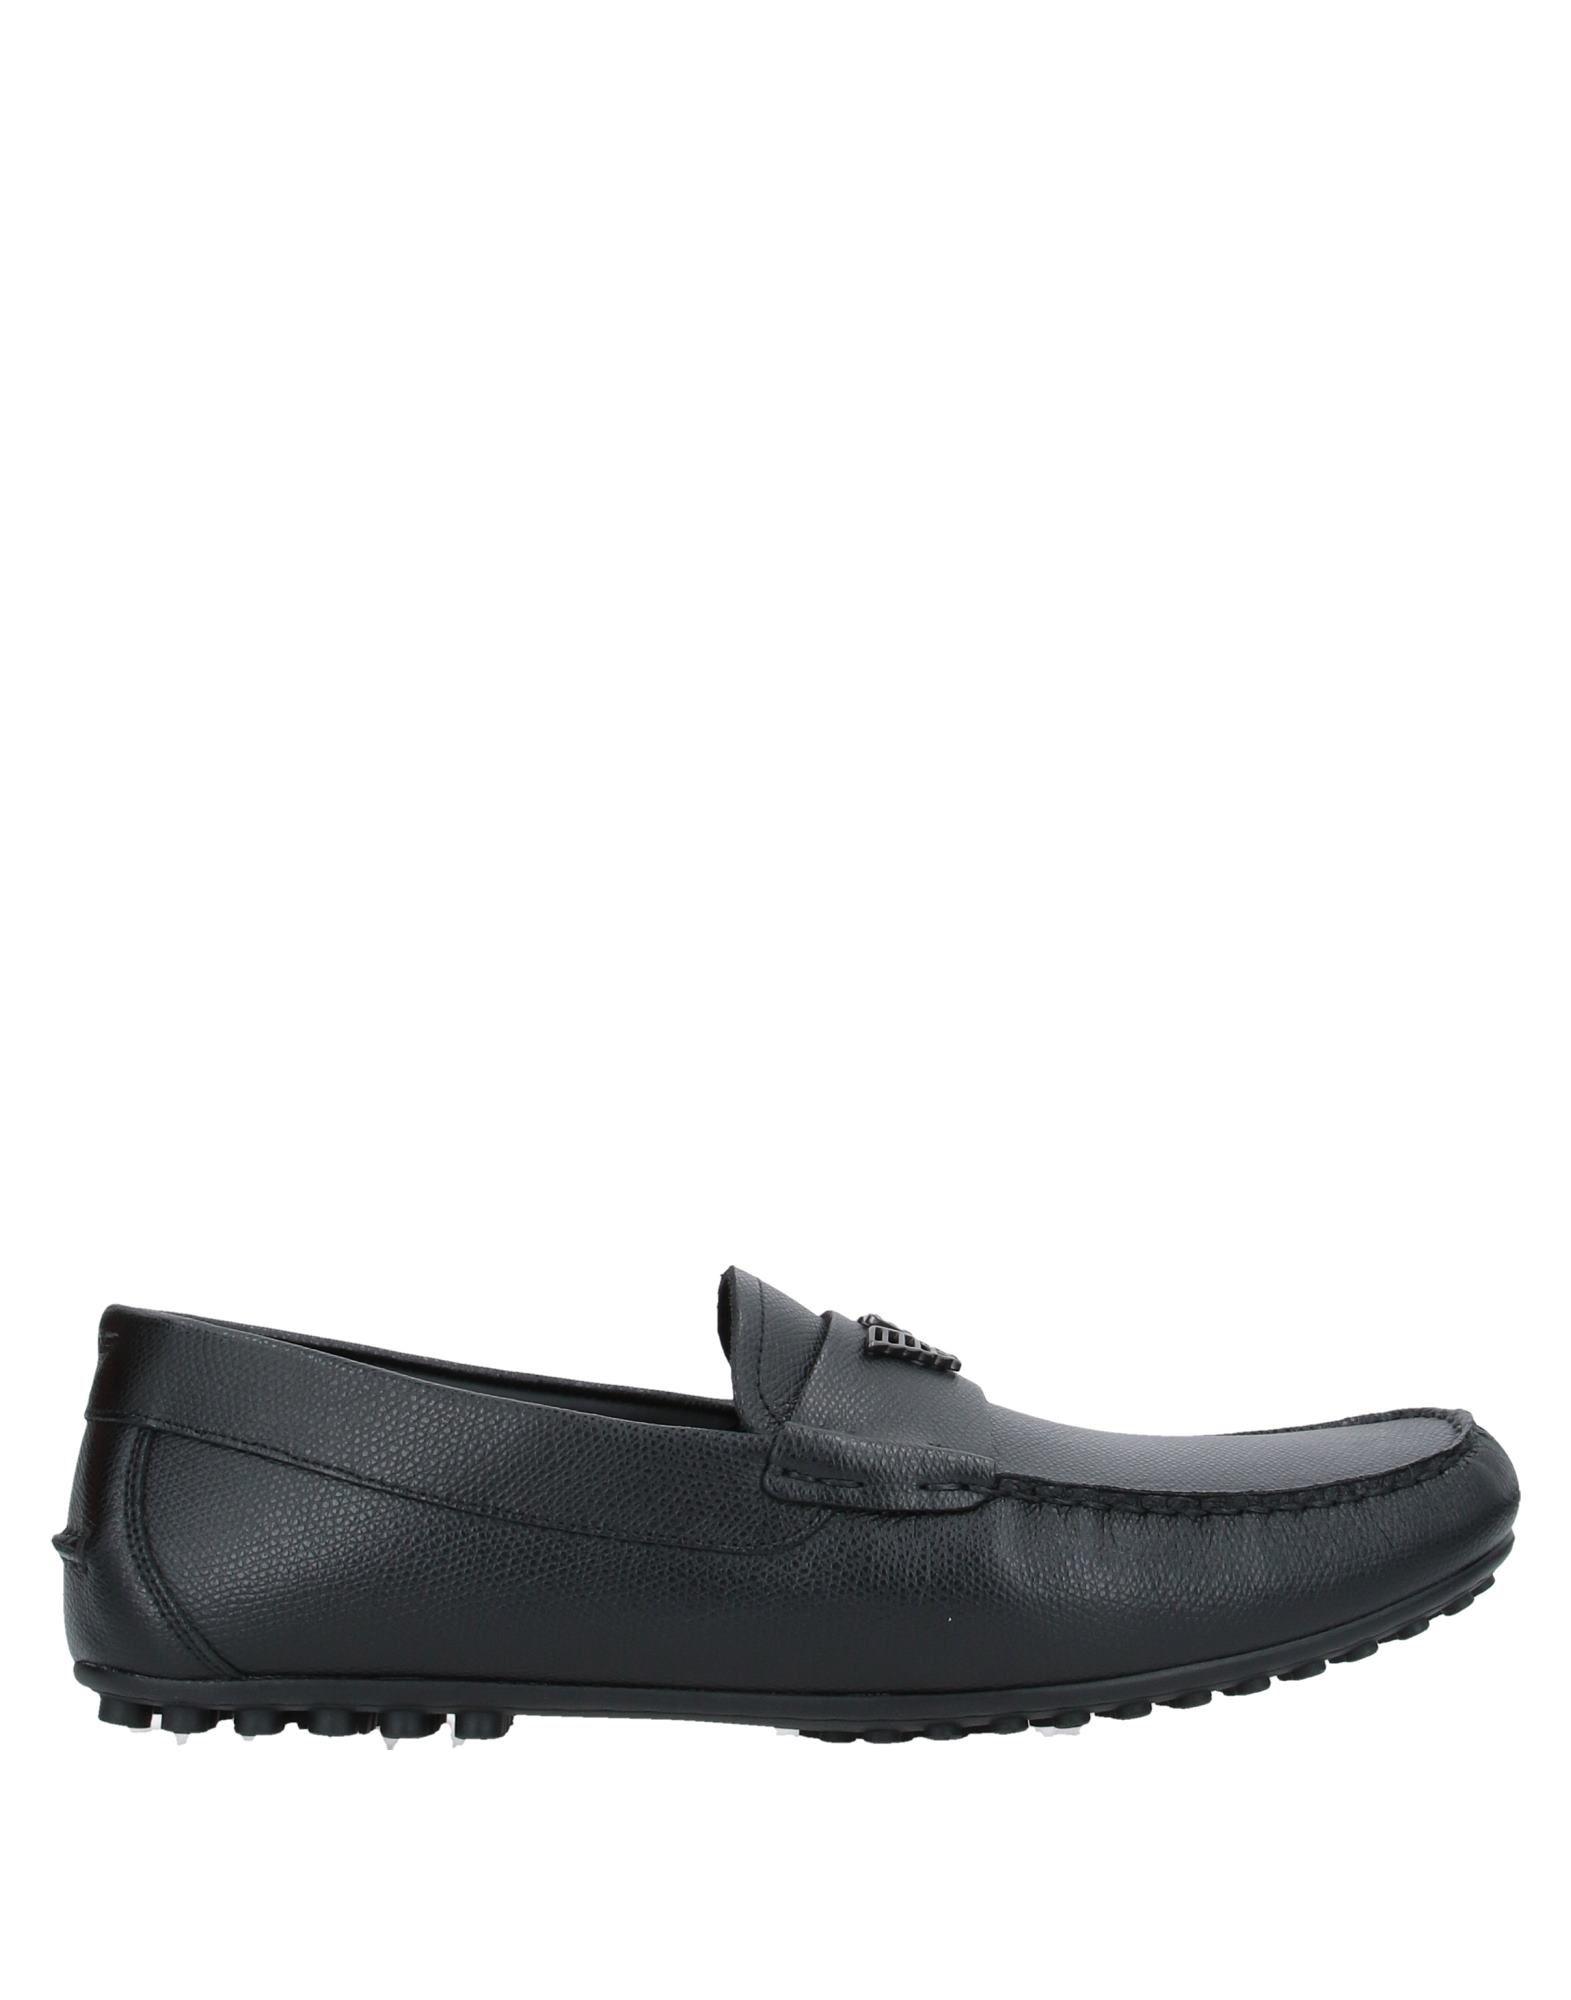 Emporio Armani Leather Loafer in Black for Men - Lyst